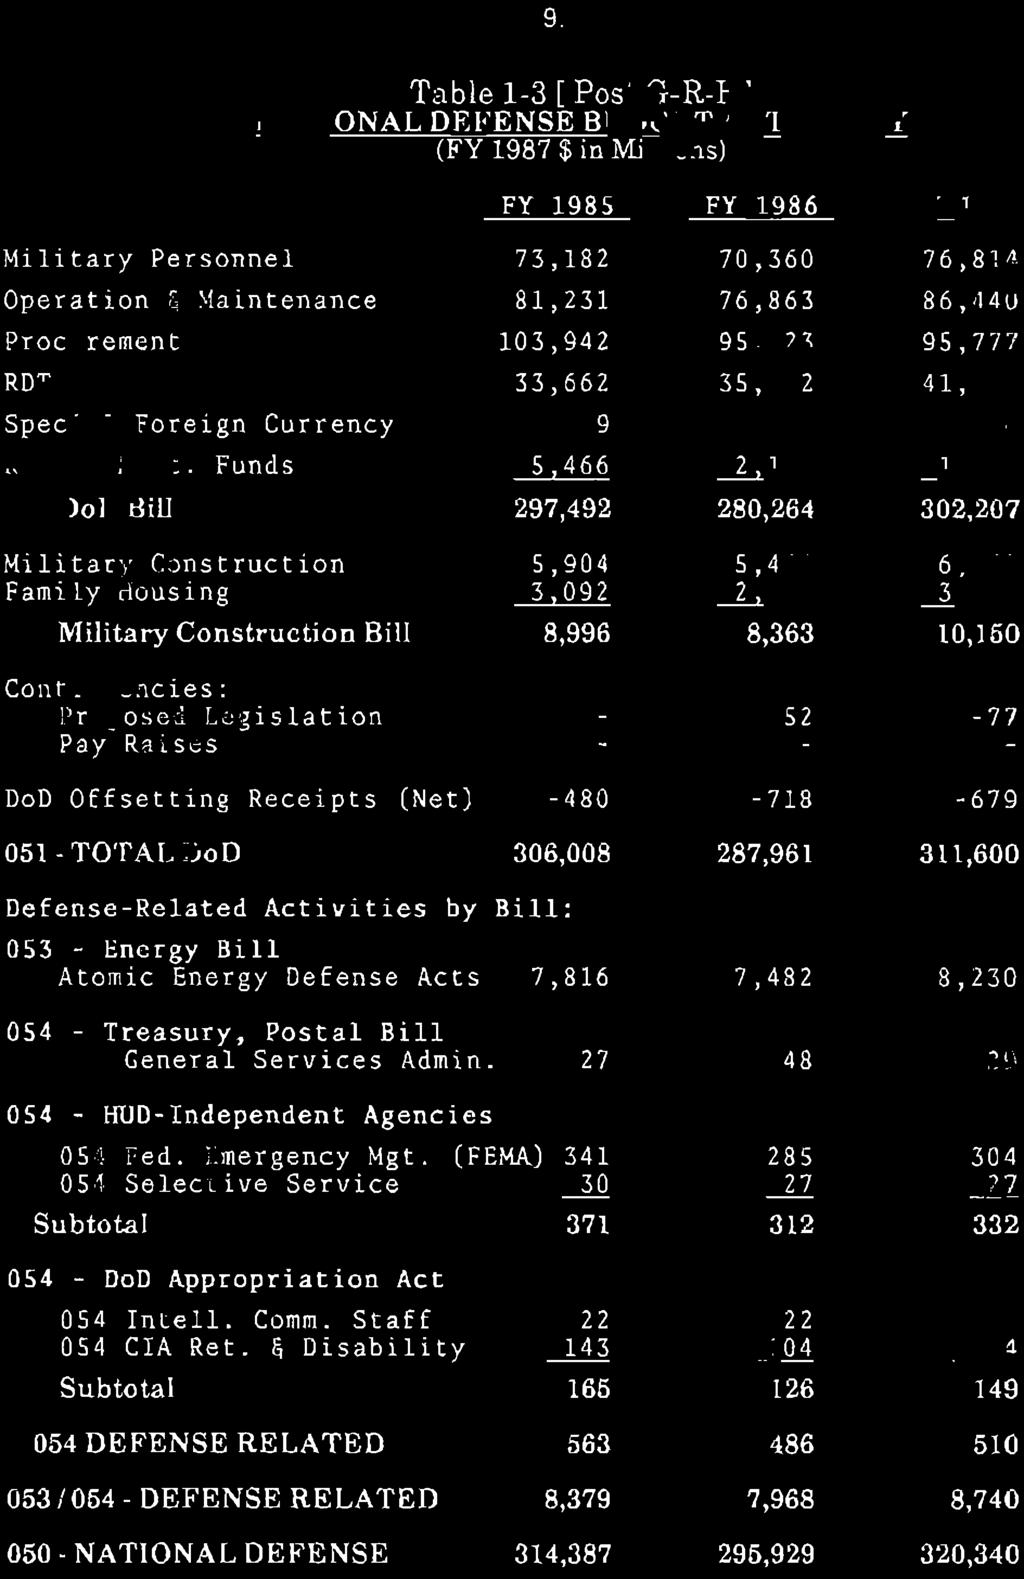 9. Table 1 3 [ Post G-R H] NATIONAL DEFENSE BUDGET AUTHORITY (FY 1987 $ in Millions) FY 1985 FY 1986 FY 1987 Military Personnel Operation & Maintenance Procurement RDT&E Special Foreign Currency Rev.